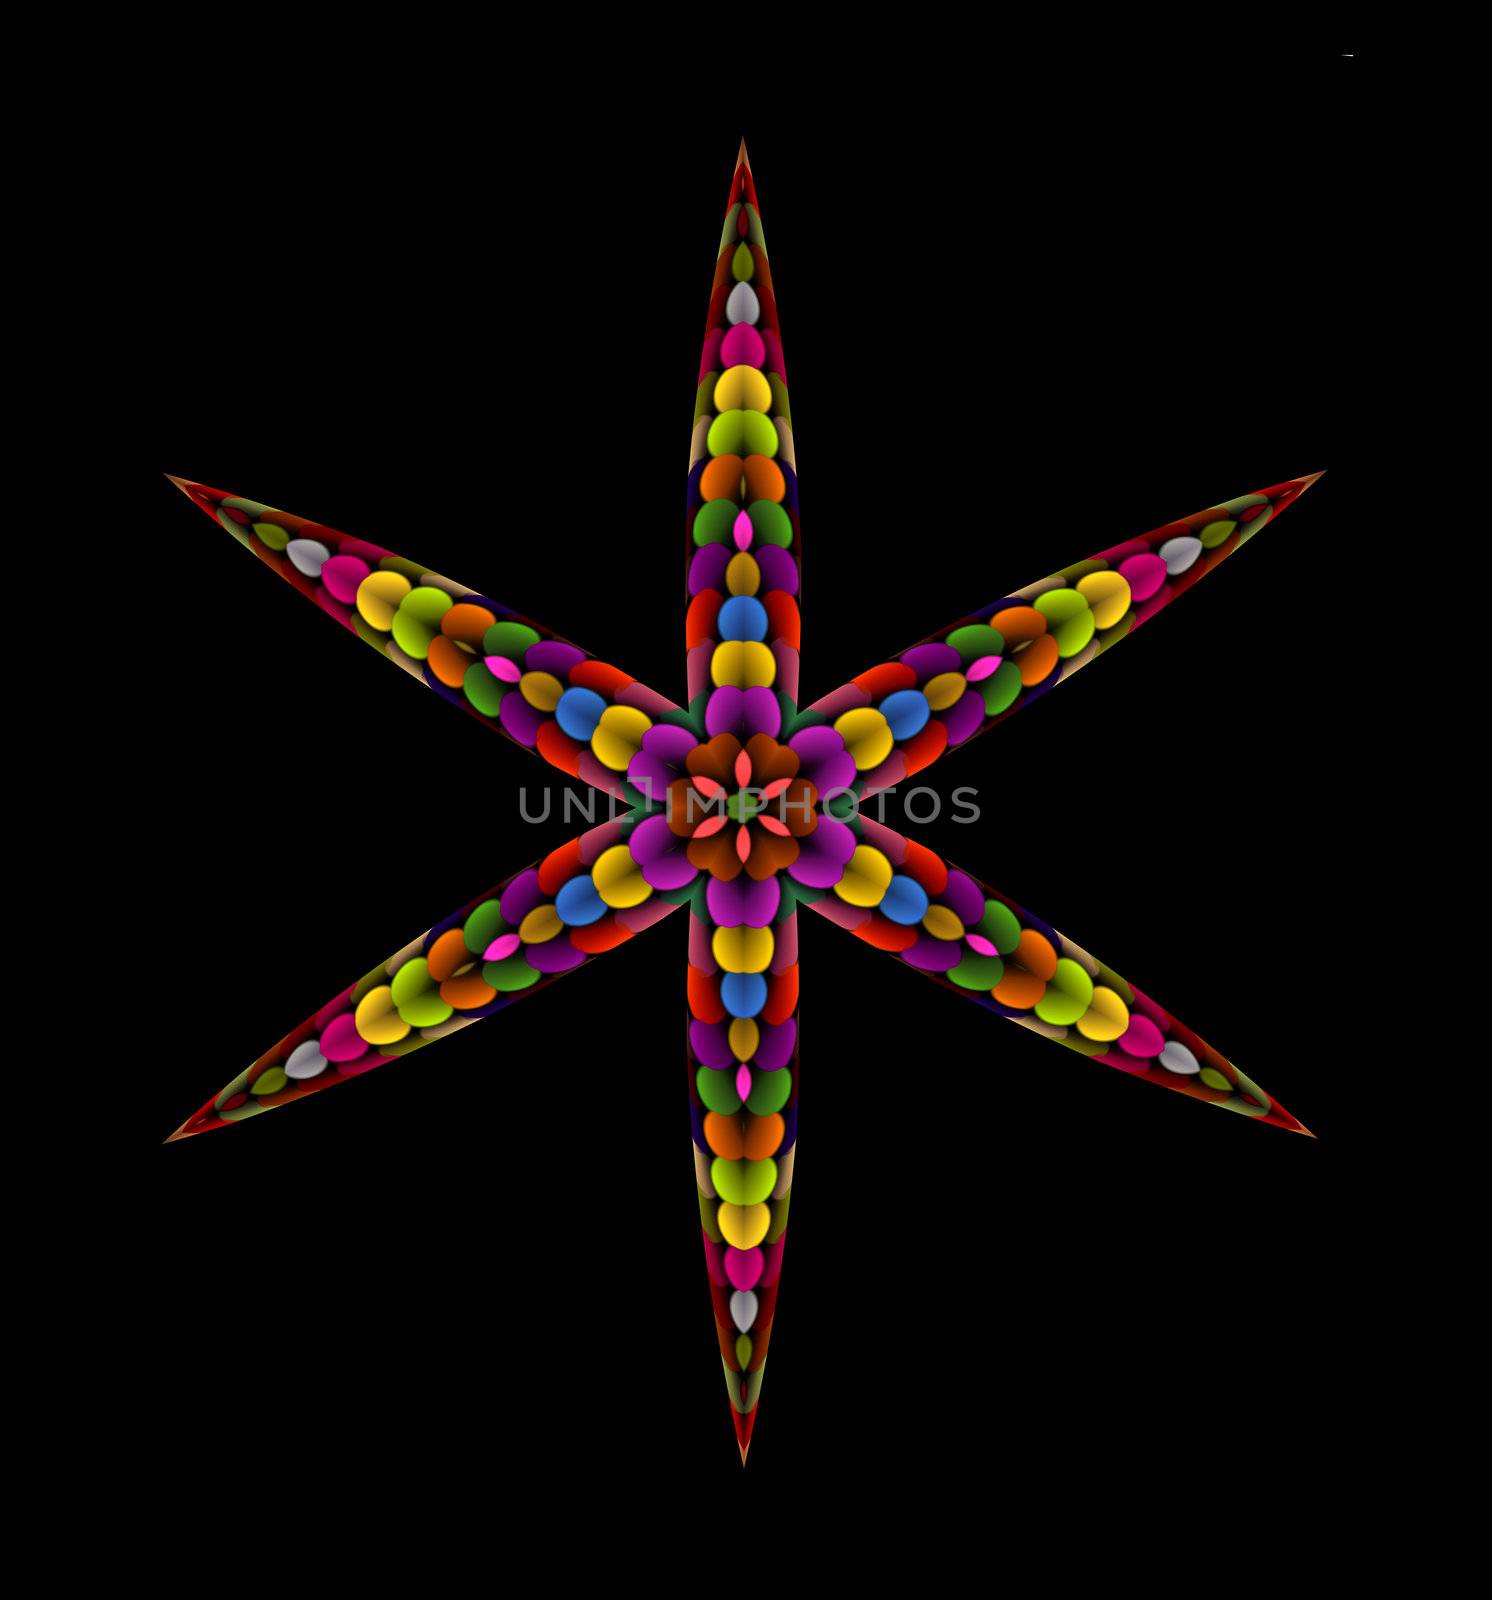 An abstract illustration of a six pointed star done in a rainbow of colors with a stylized floral central motif.